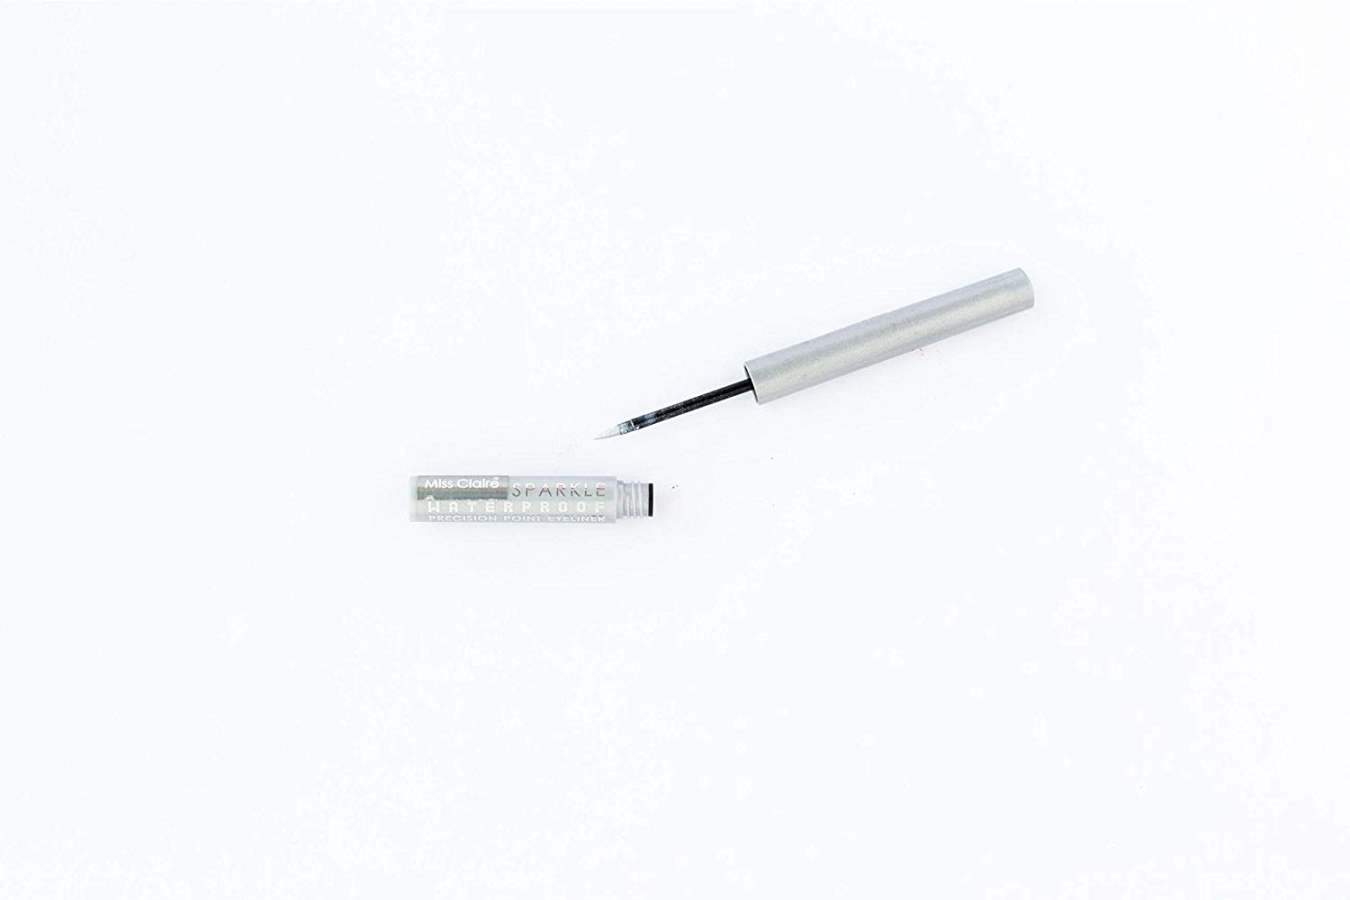 Buy Miss Claire Parkle Waterproof Precision Point Eyeliner, Silver